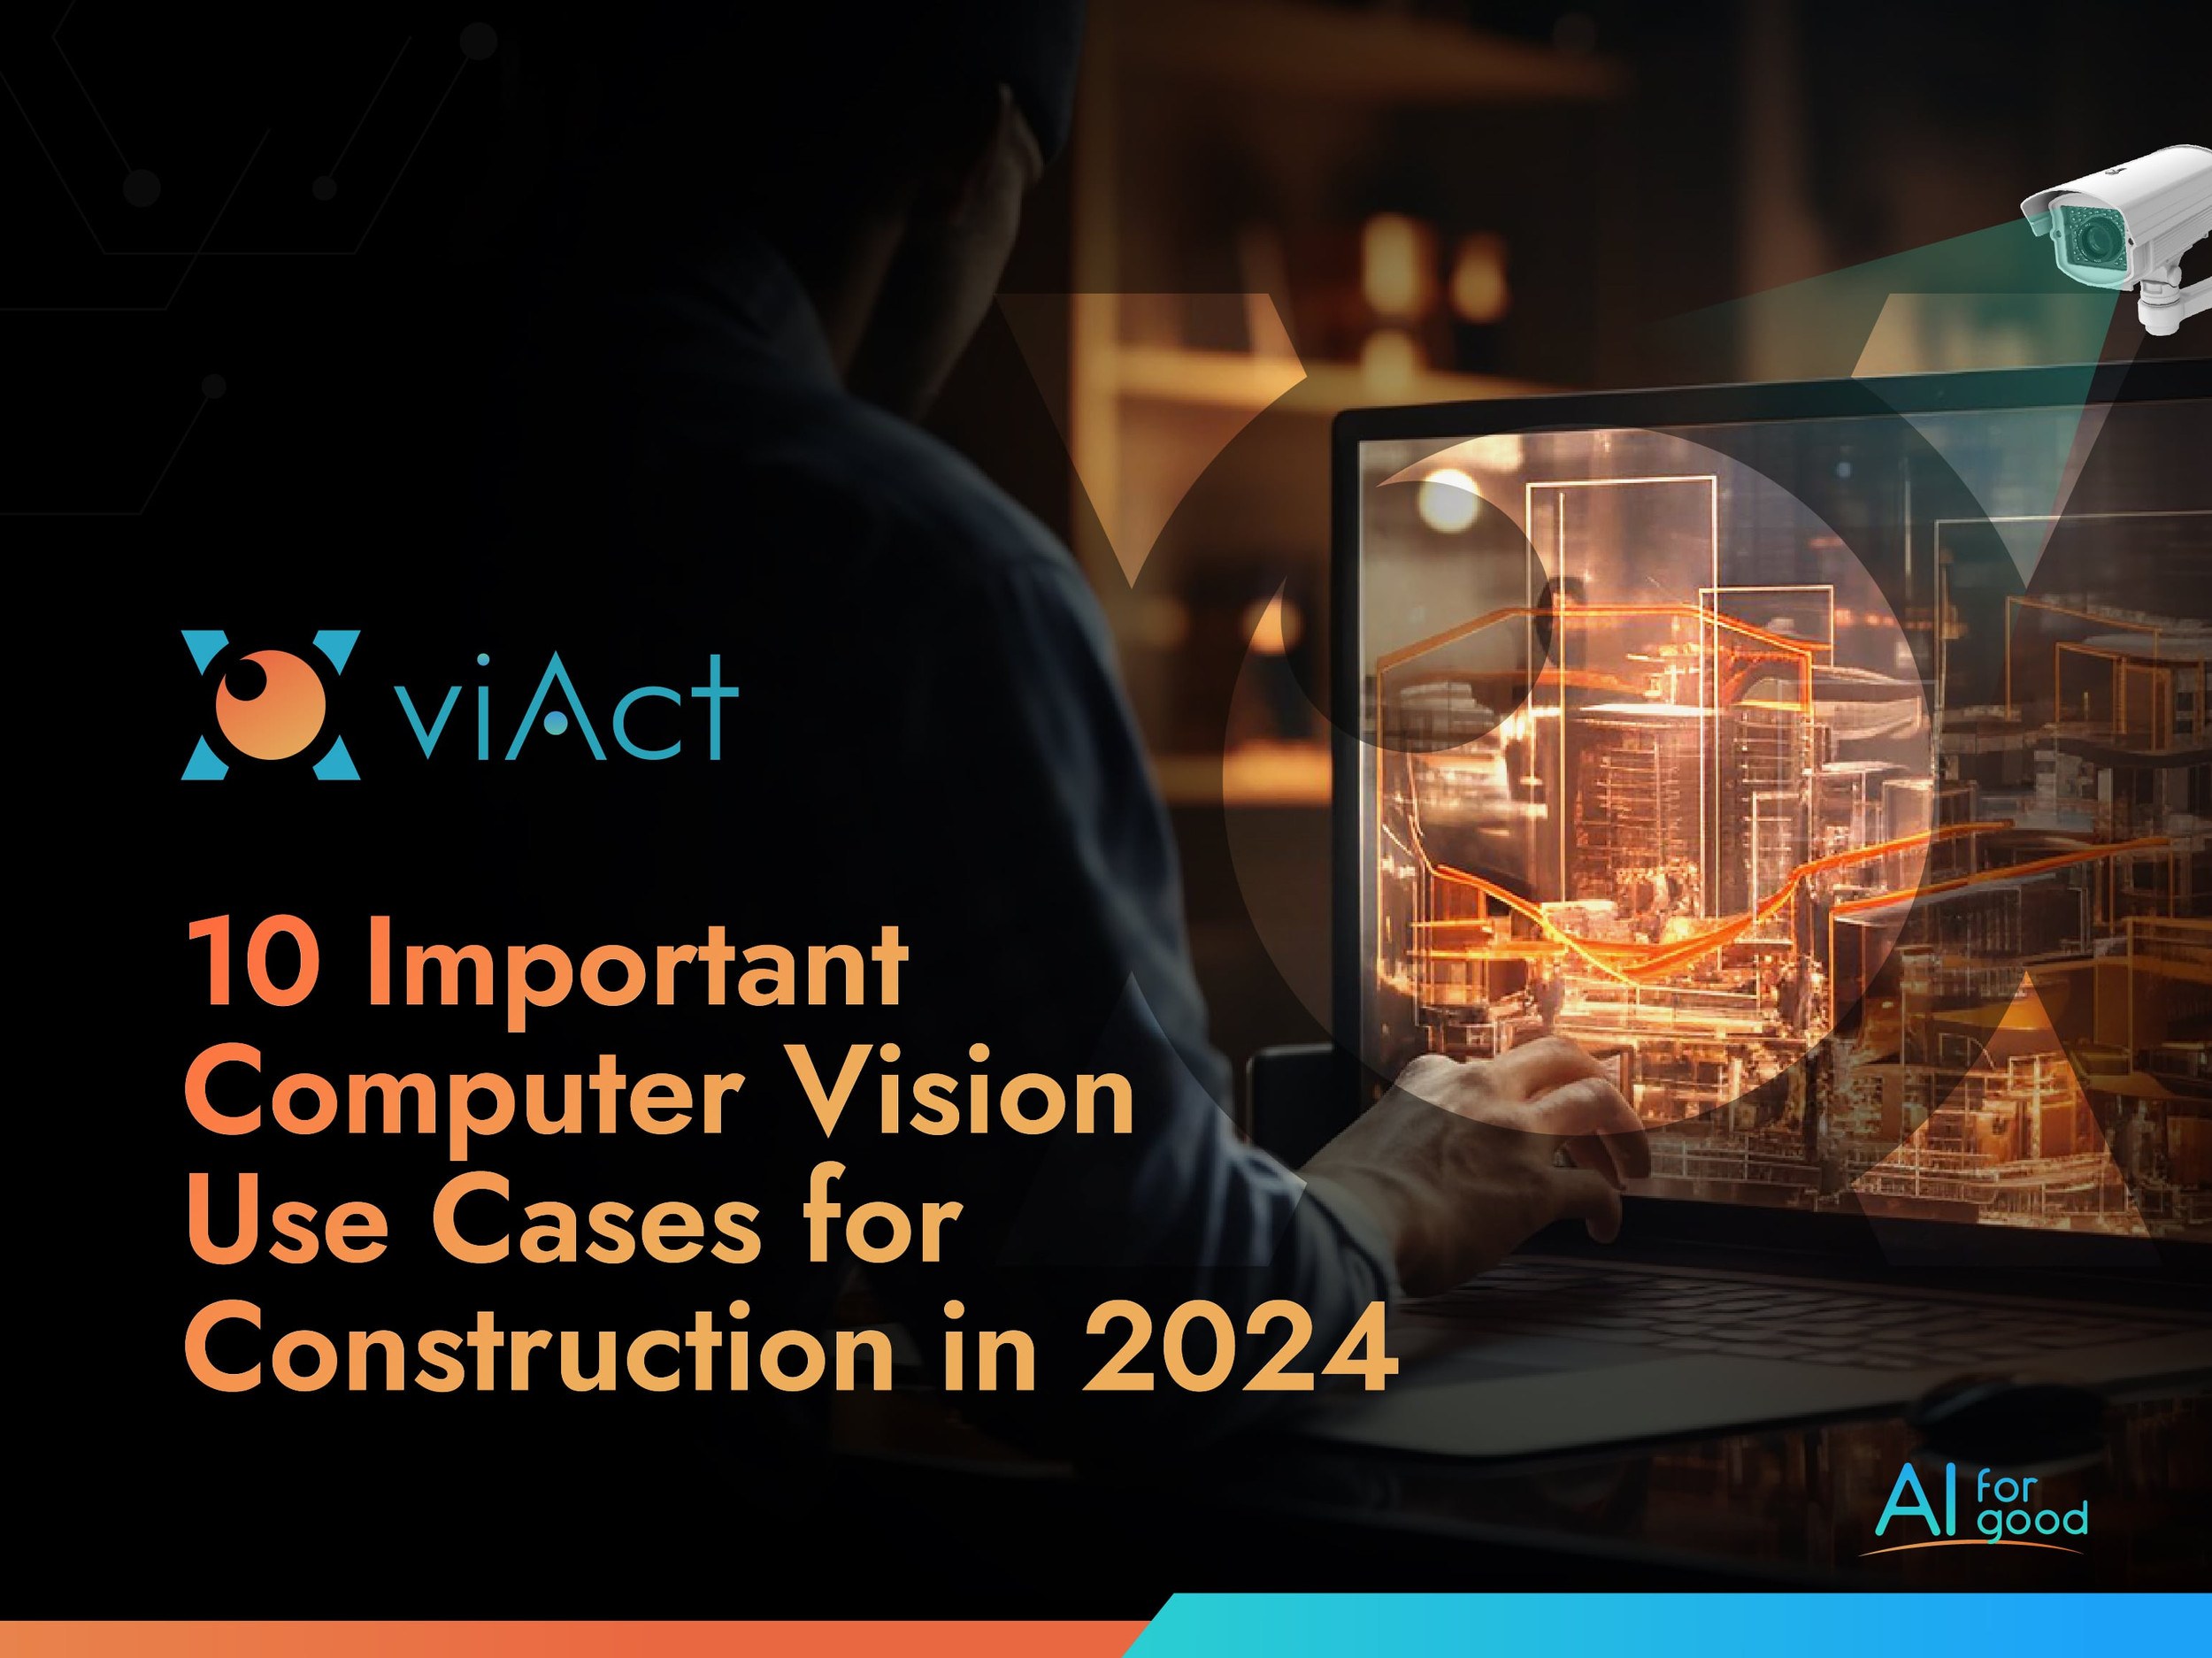 10 Important Computer Vision Use Cases for Construction in 2024